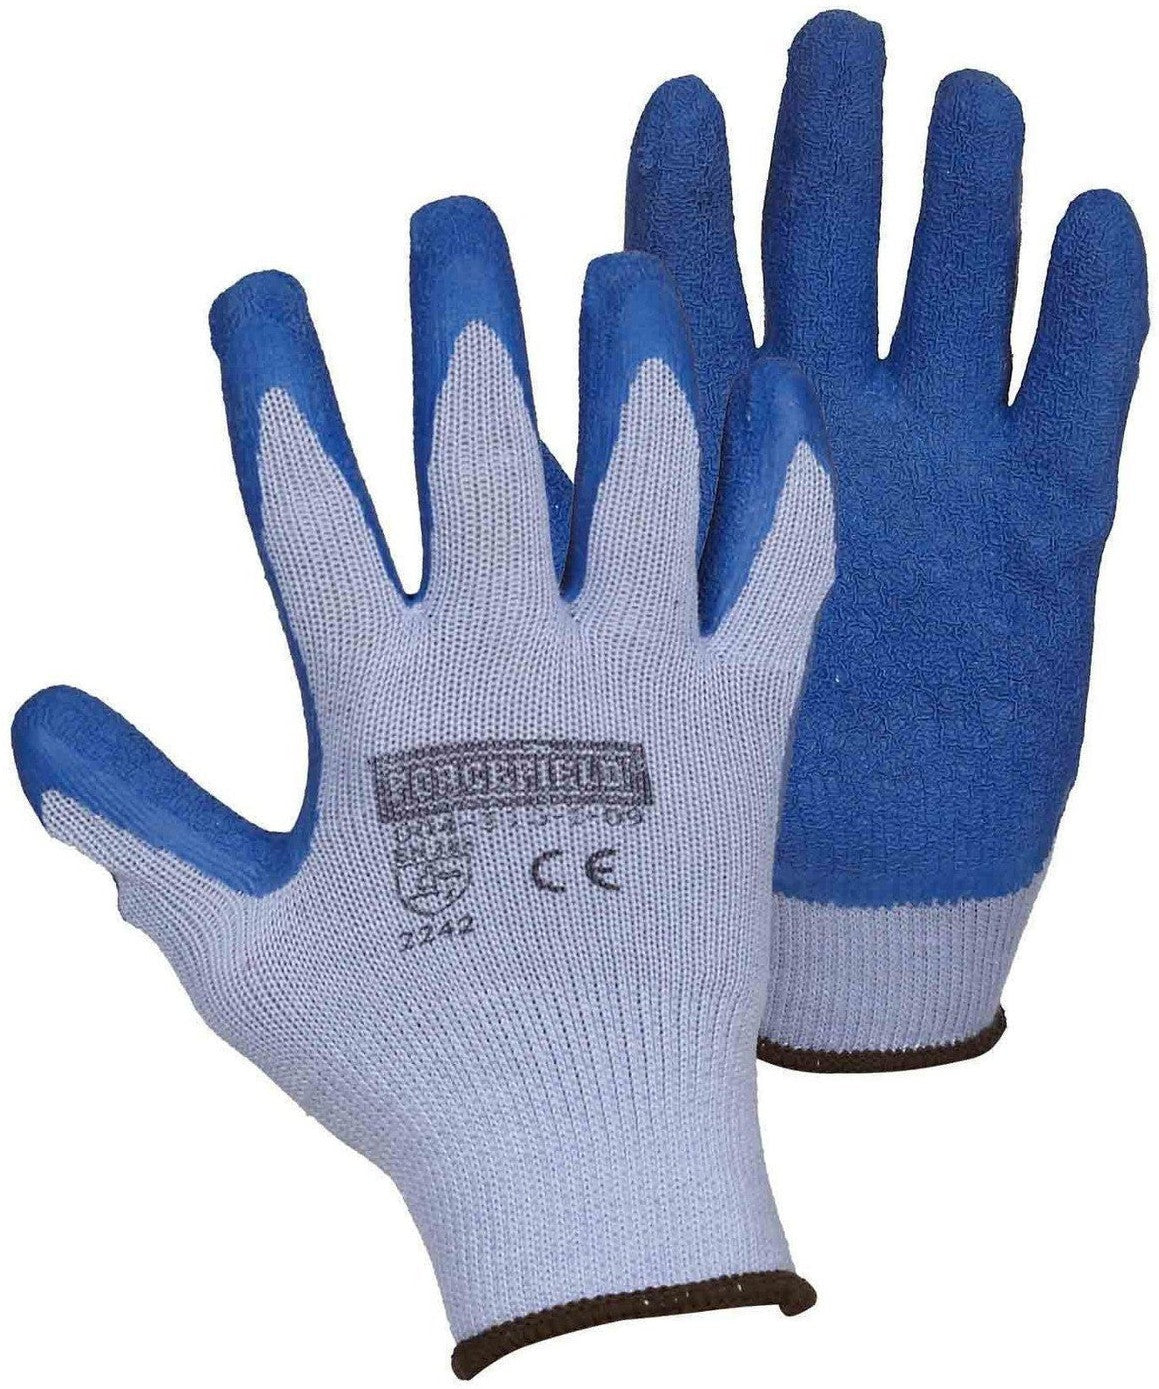 Forcefield - 8" Palm Coated With Blue Crinkle Latex String Knit Work Gloves - 004-310-I-08